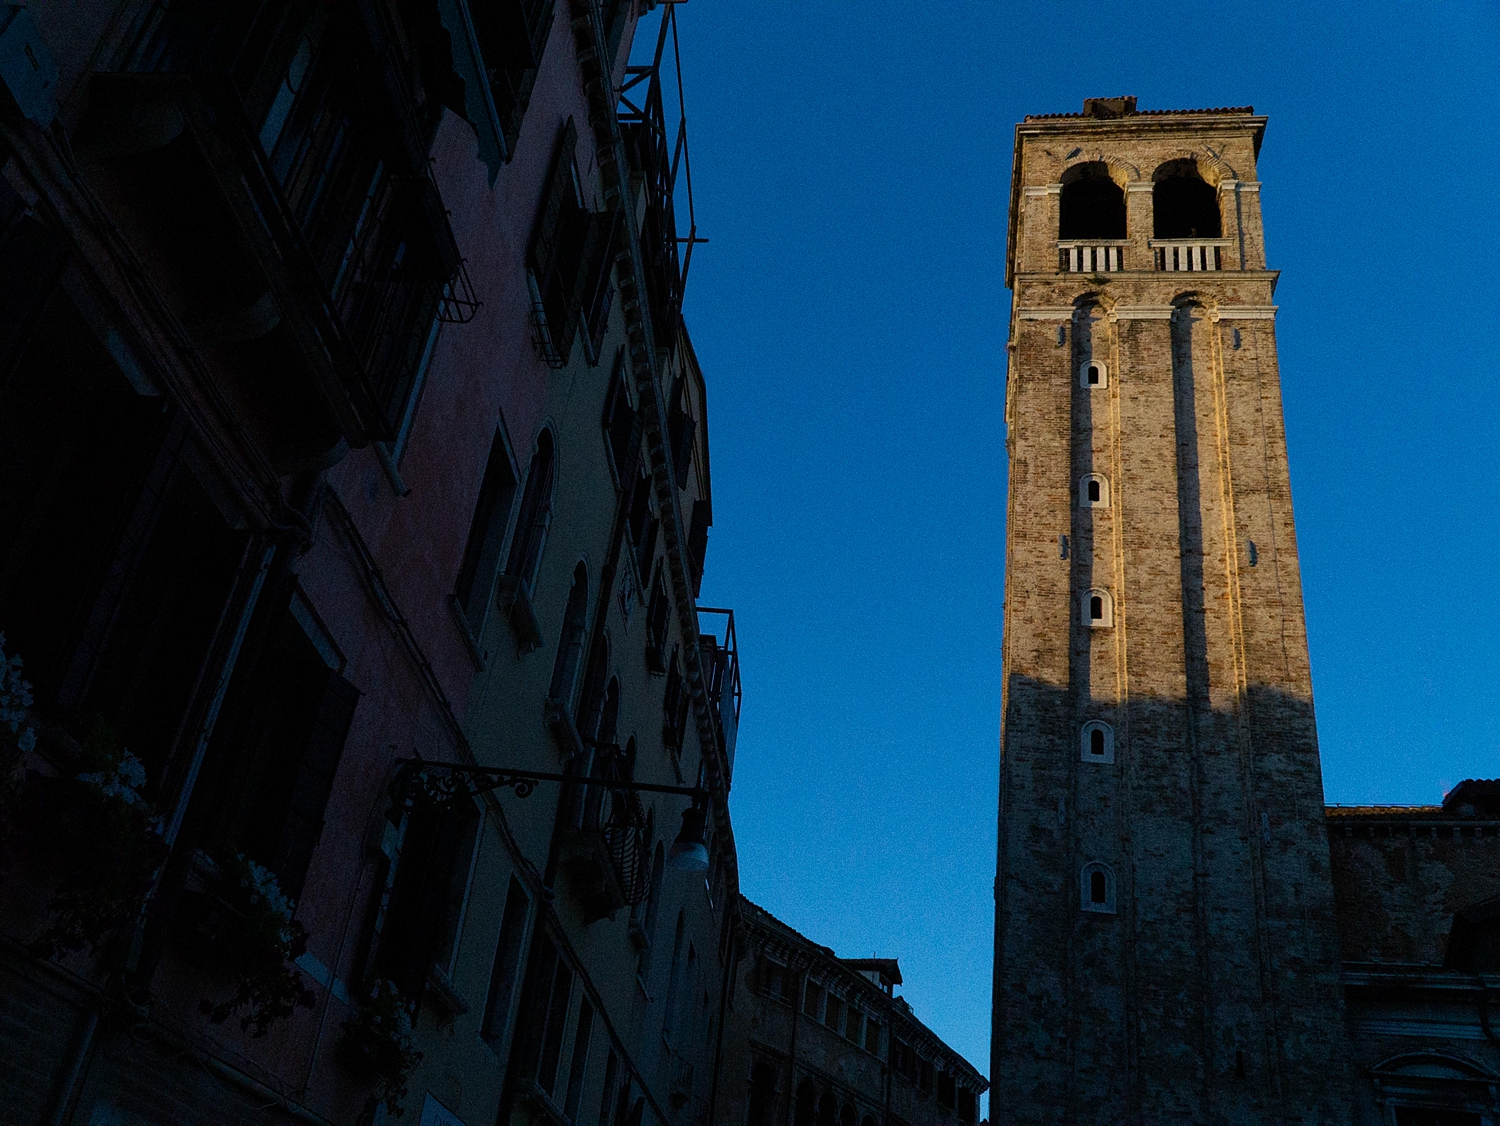 Evening in Venice church tower leaning against blue sky